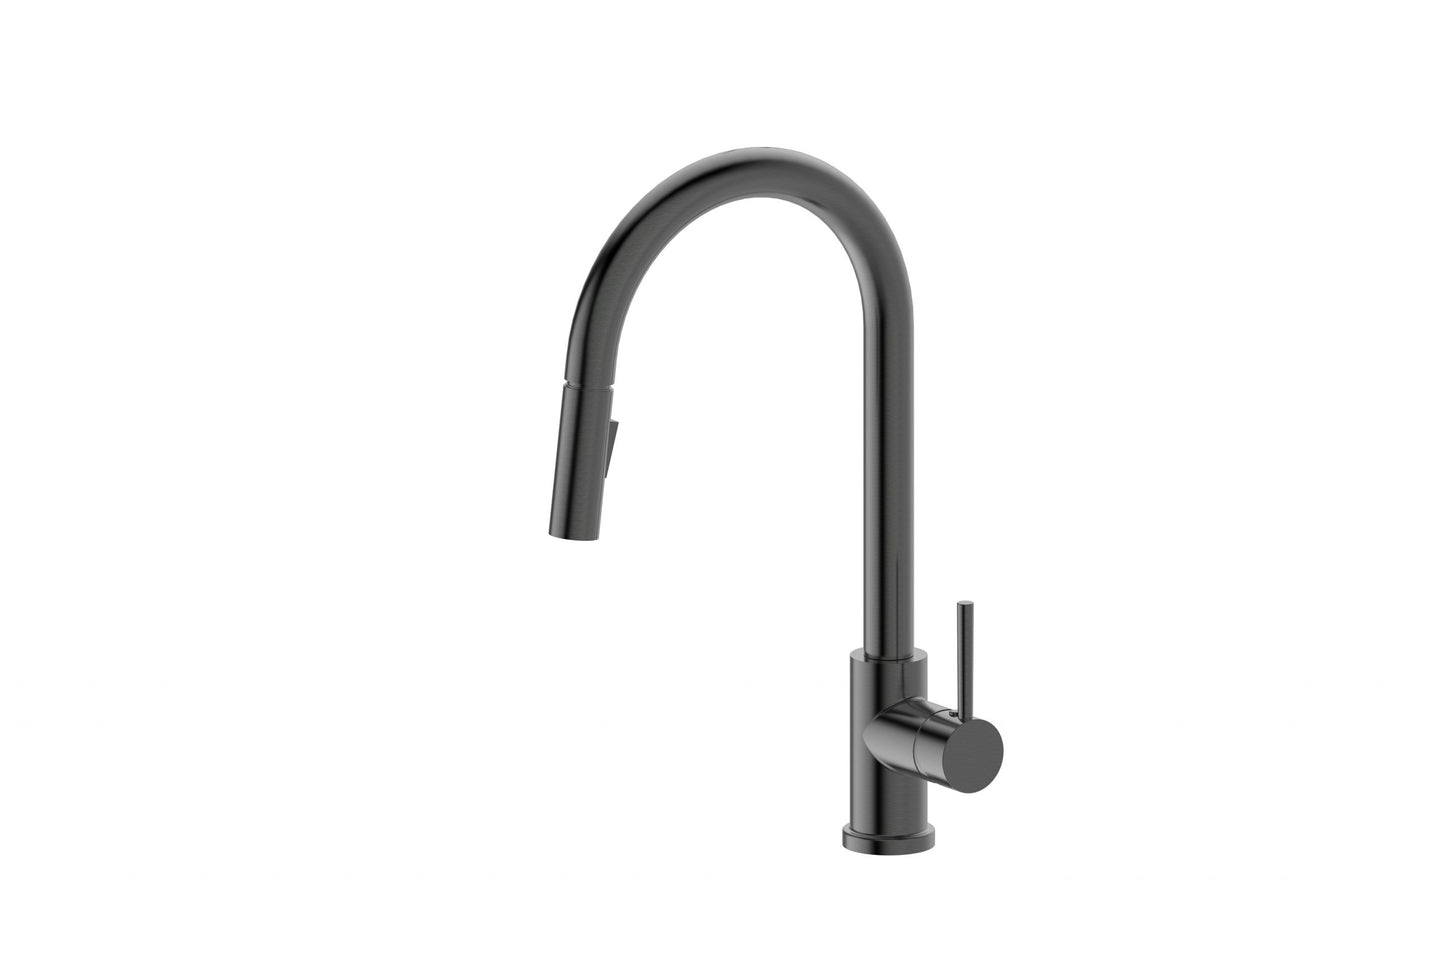 Küchendesigner Pull-Out Curved Kitchen Mixer